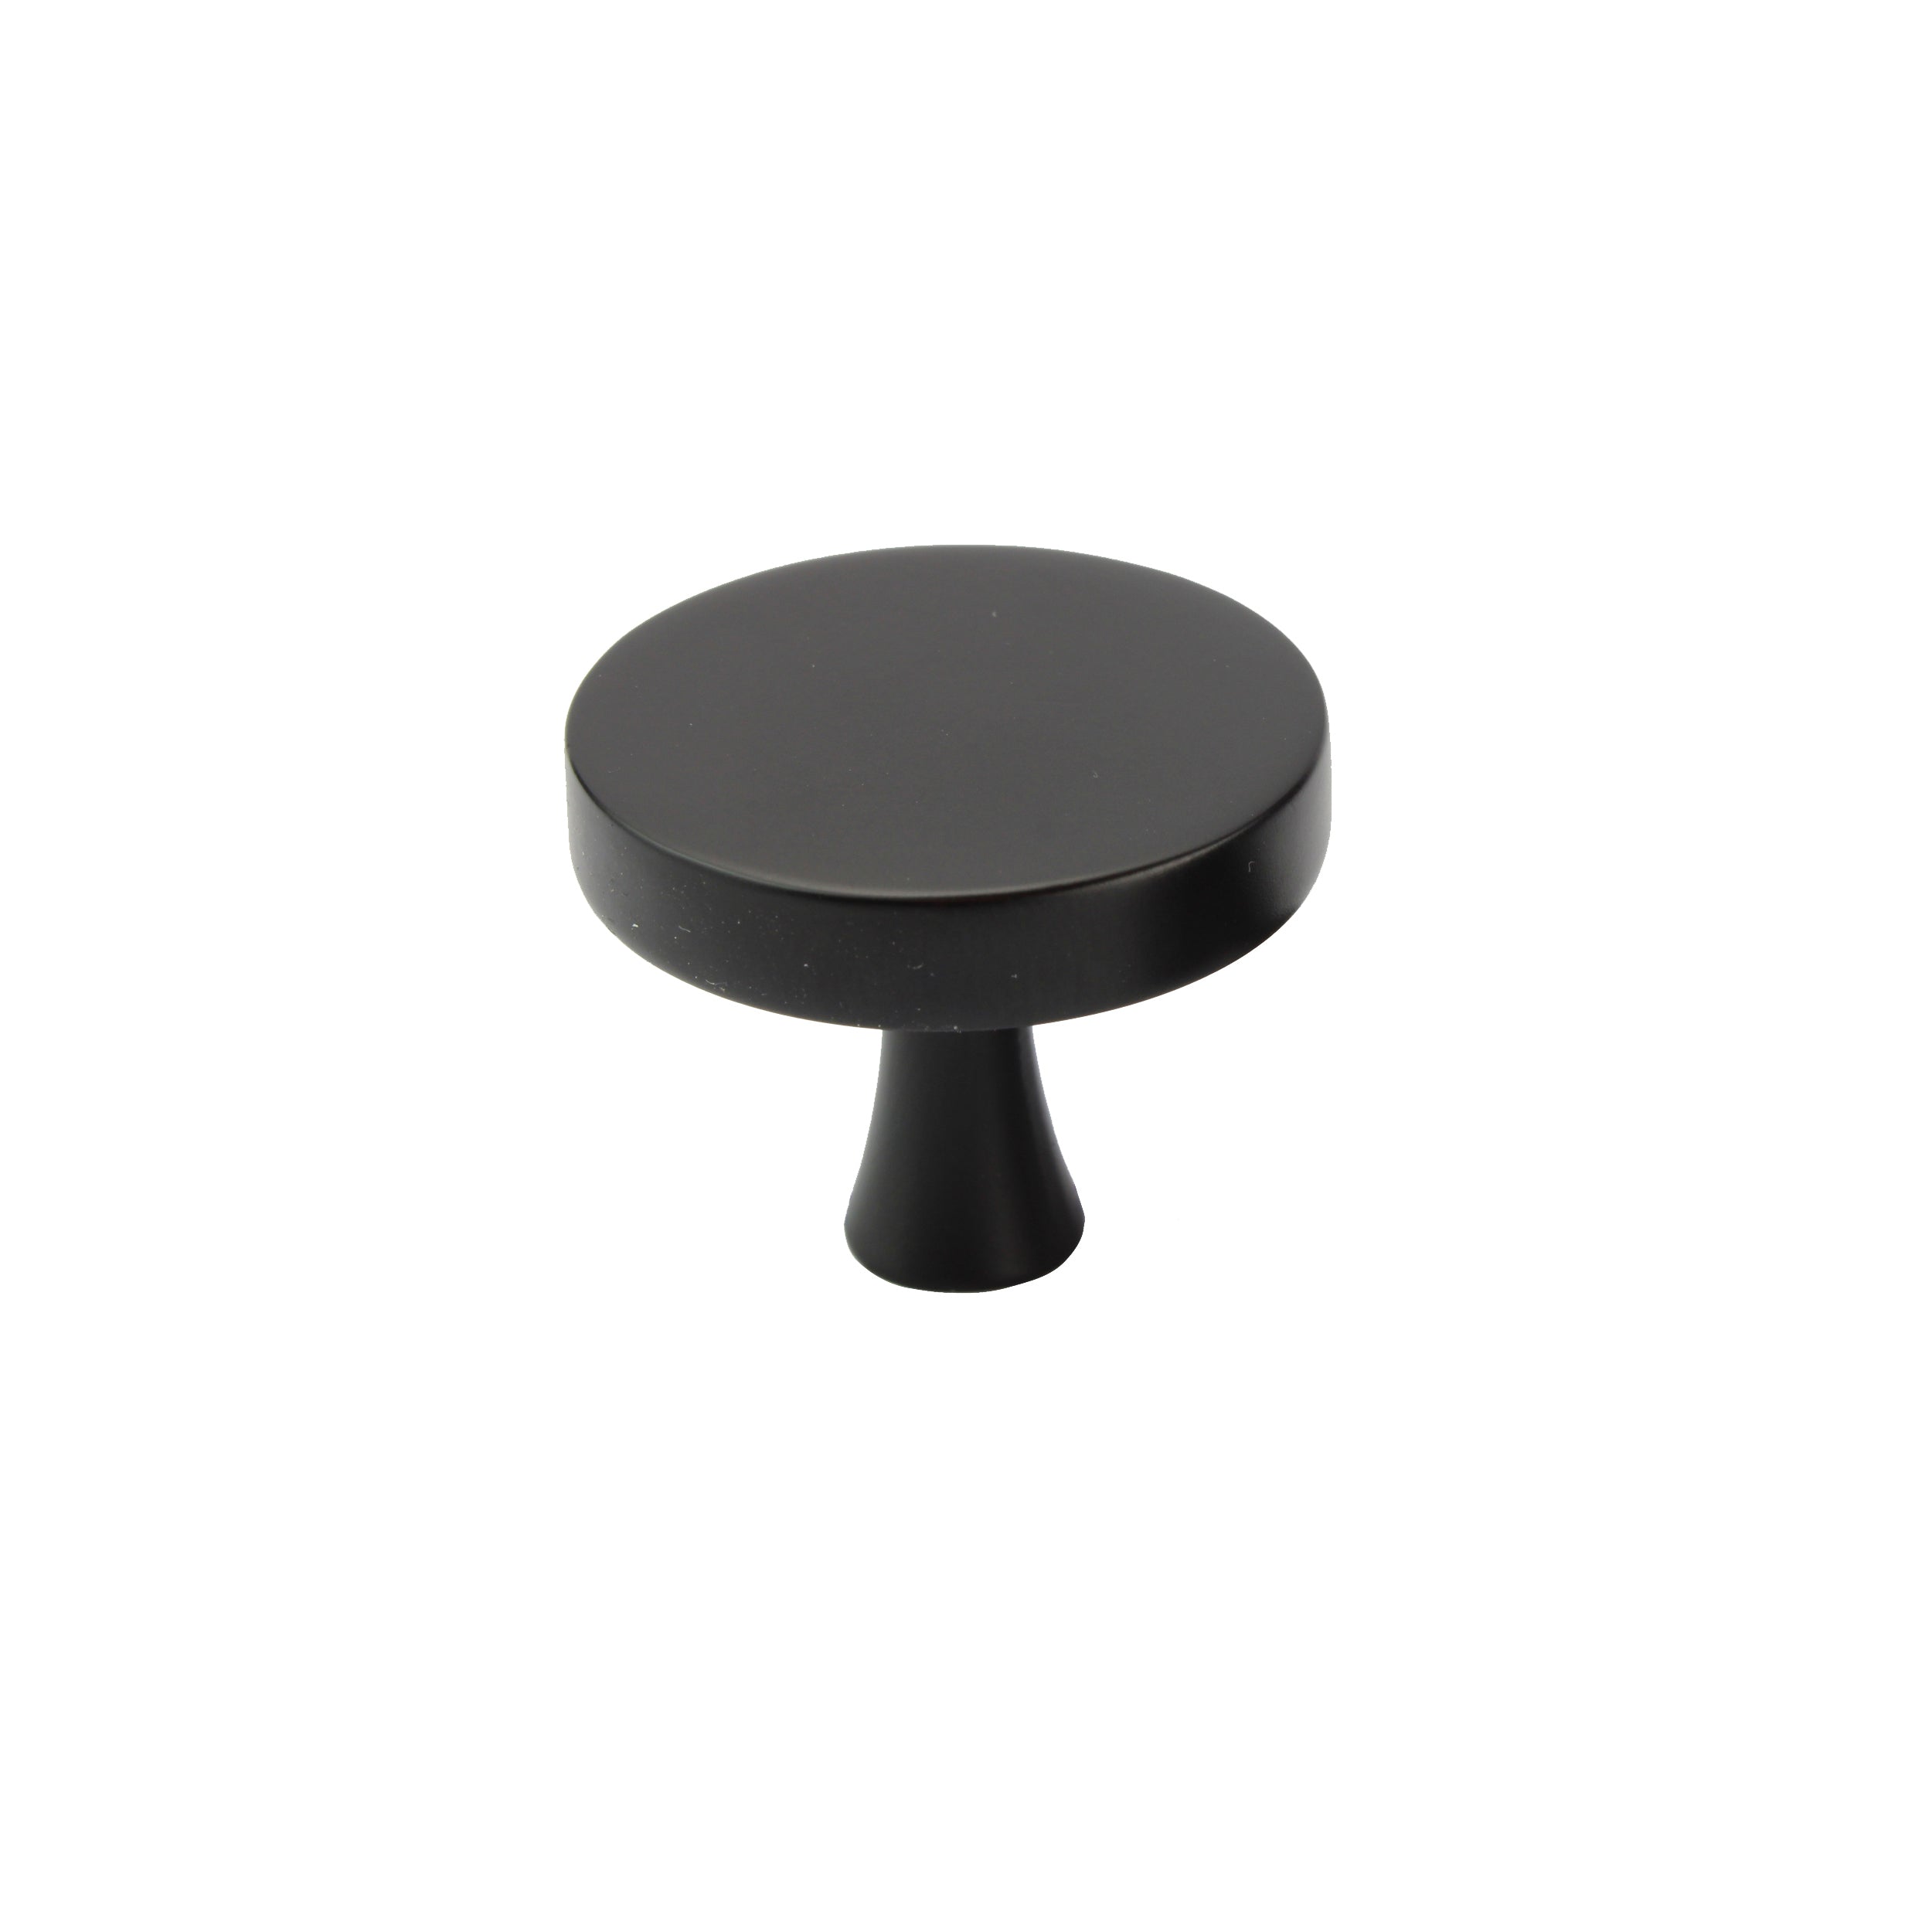 Furniture handle roundabout